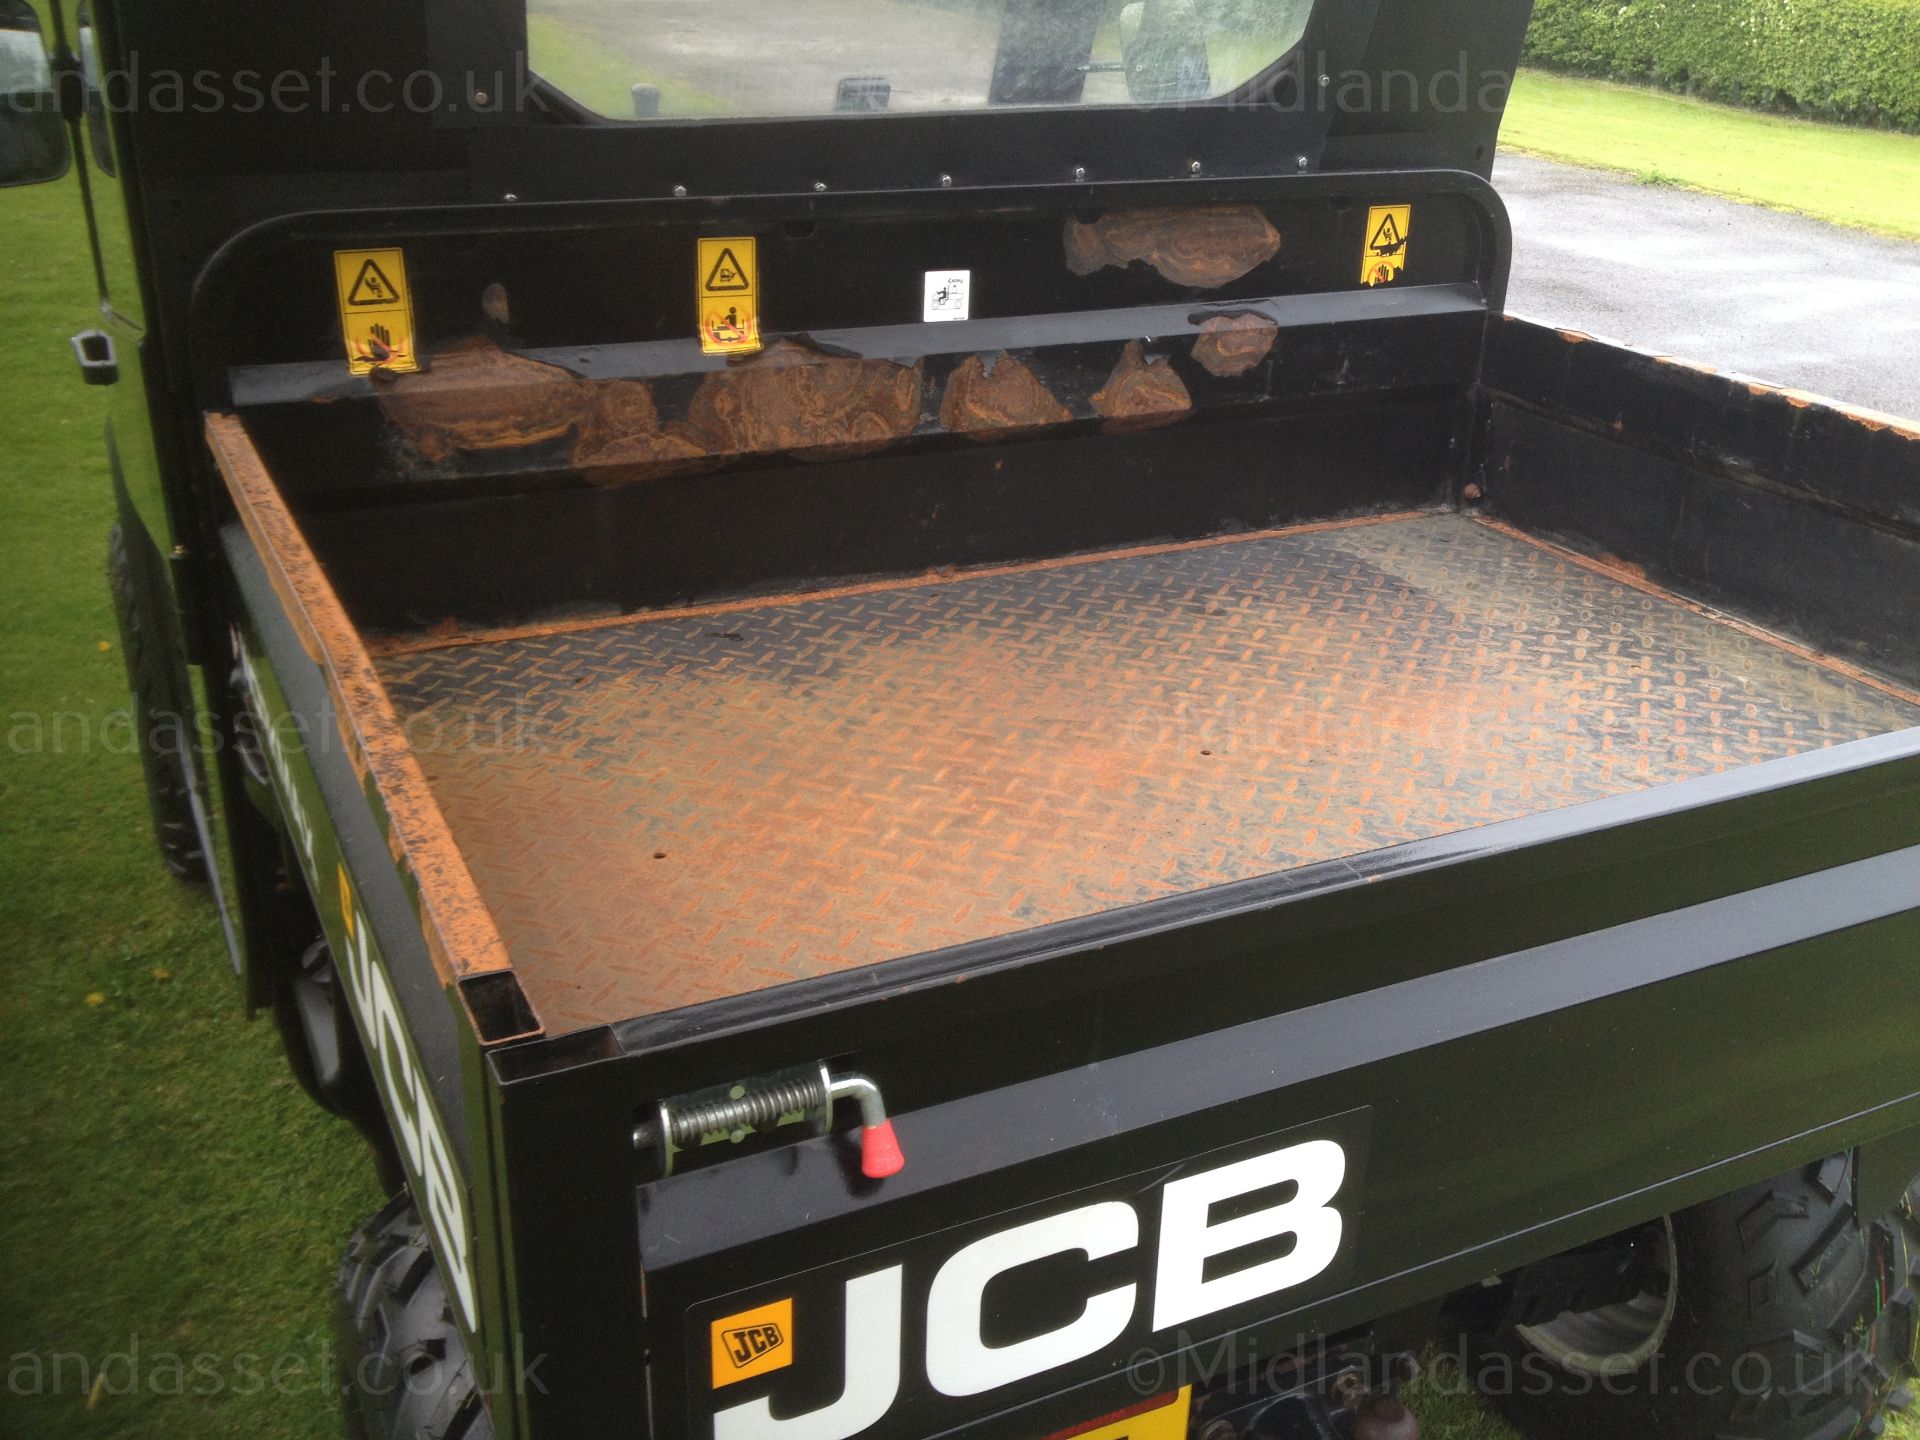 2012 JCB WORKMAX 800D UTILITY VEHICLE - Image 5 of 9